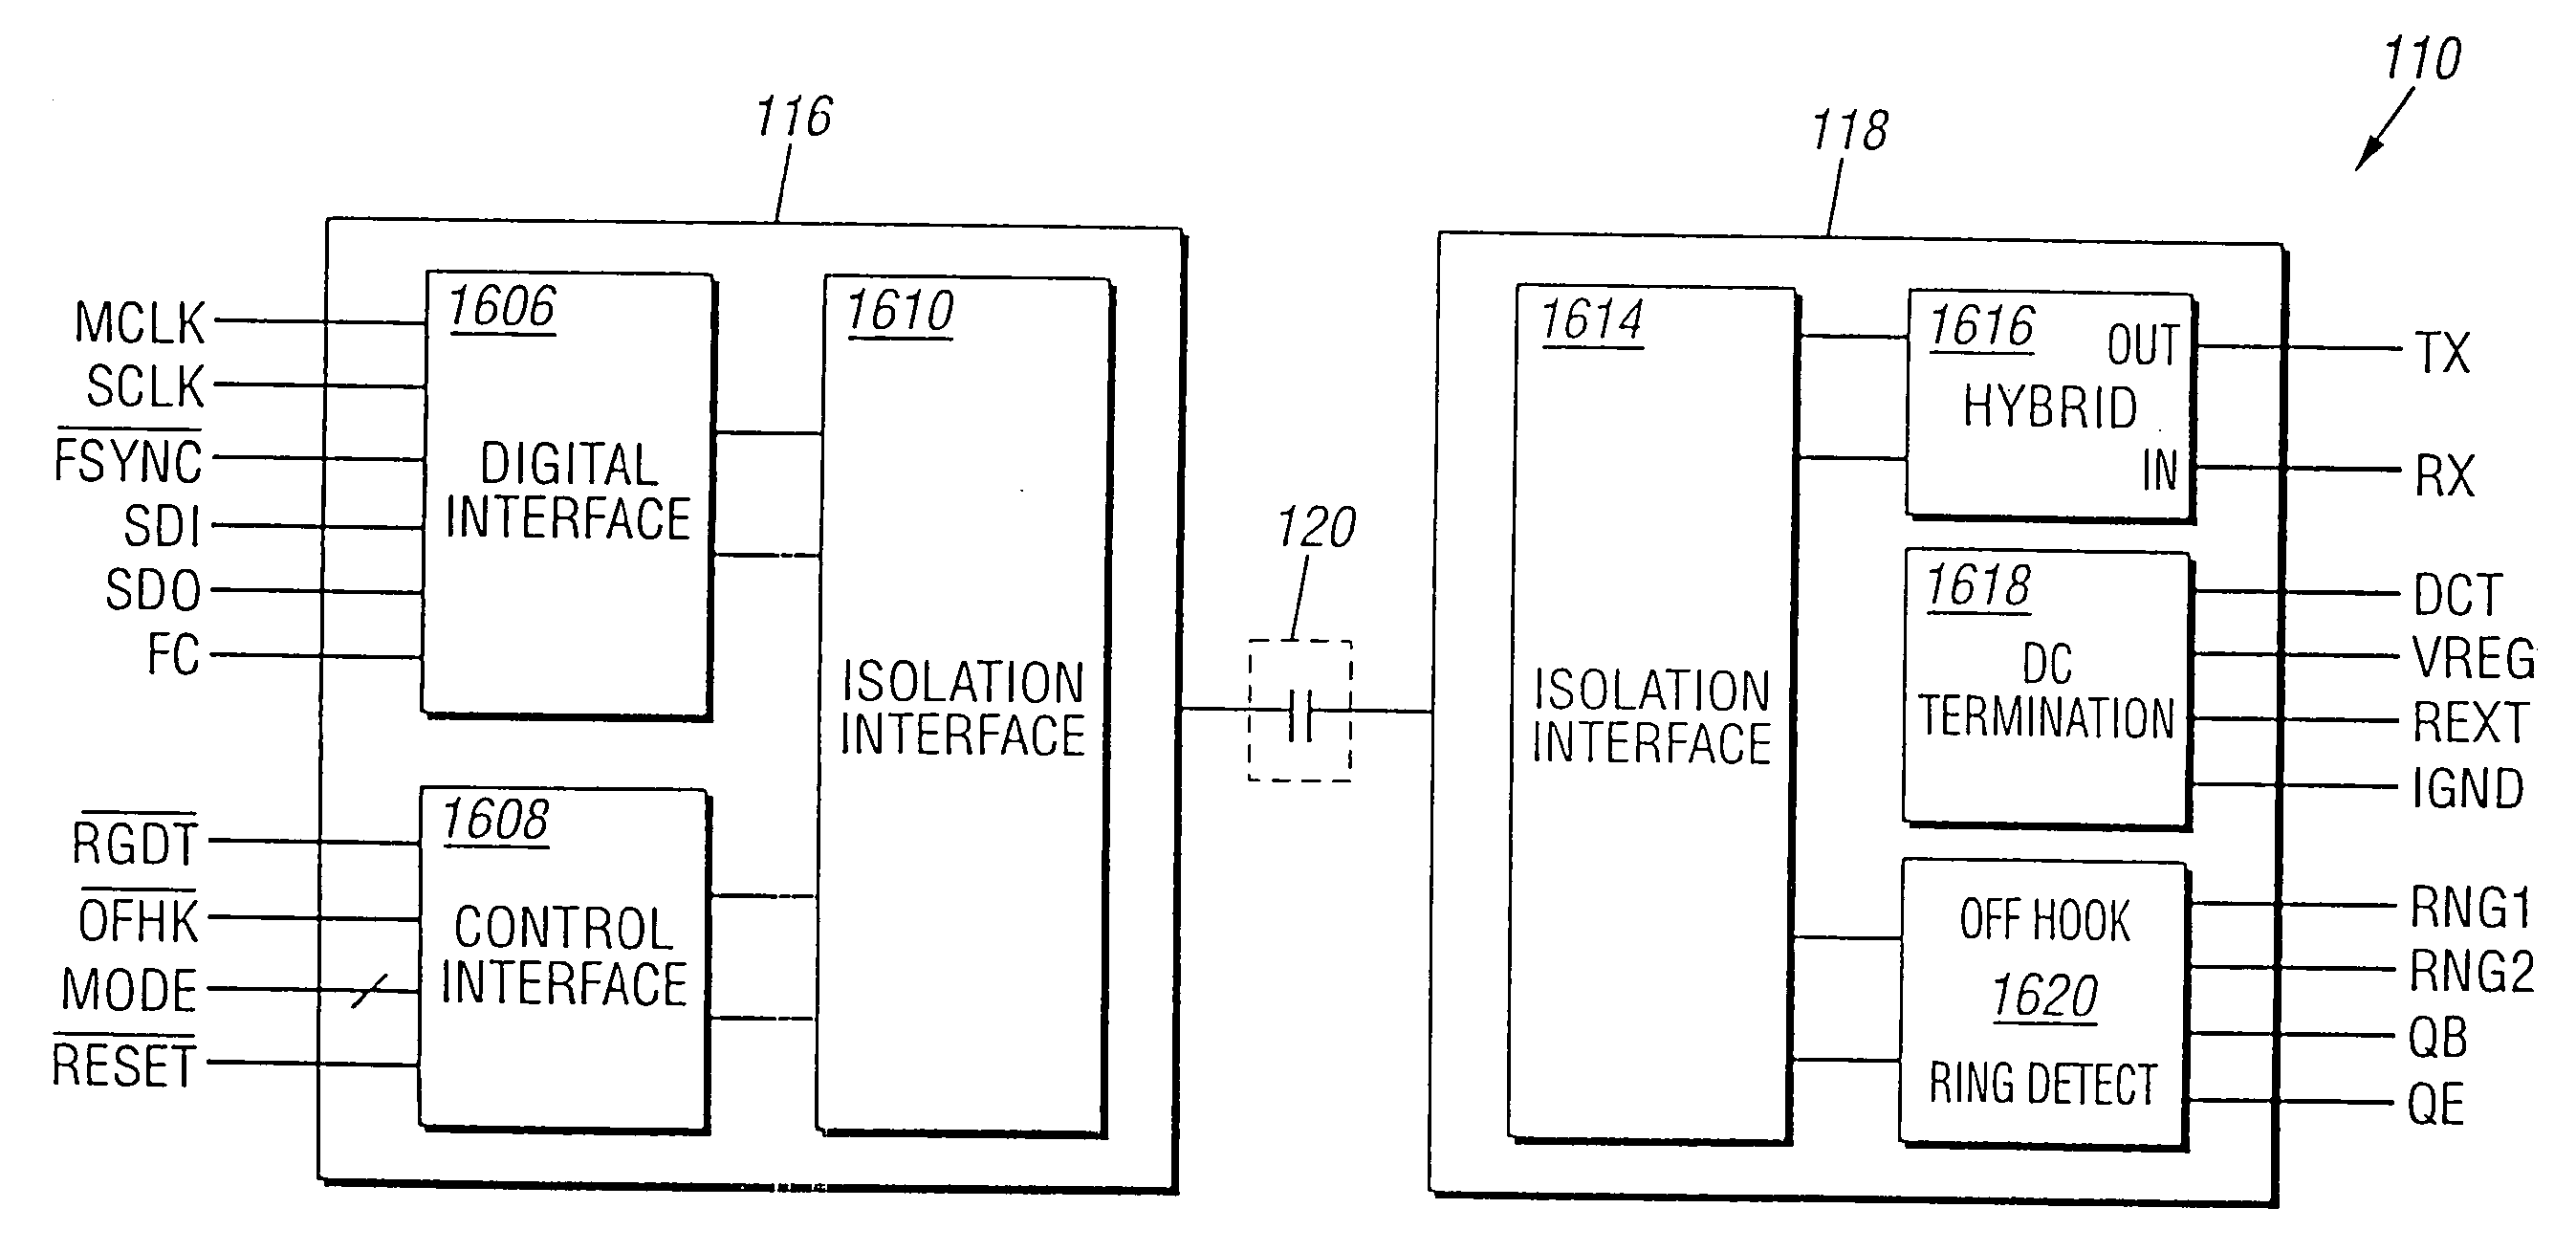 Direct digital access arrangement circuitry and method for connecting to phone lines